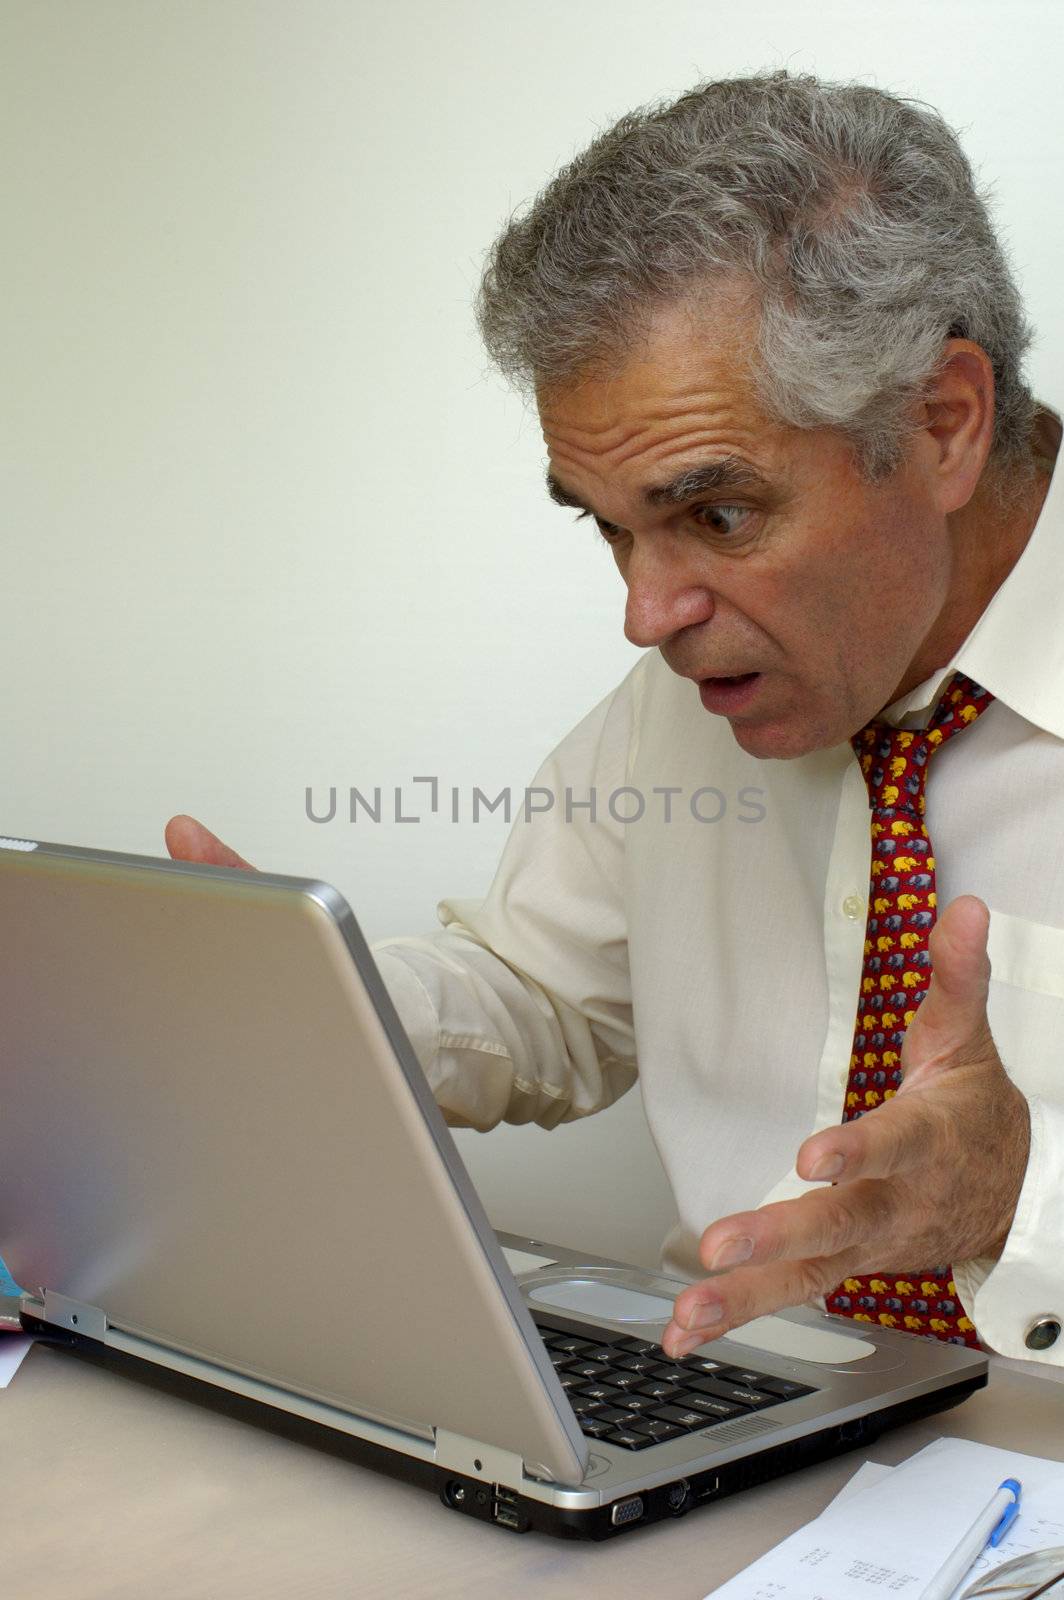 A businessman looks at the screen of his laptop and holds out his hands in amazement. What's the pesky machine up to now?